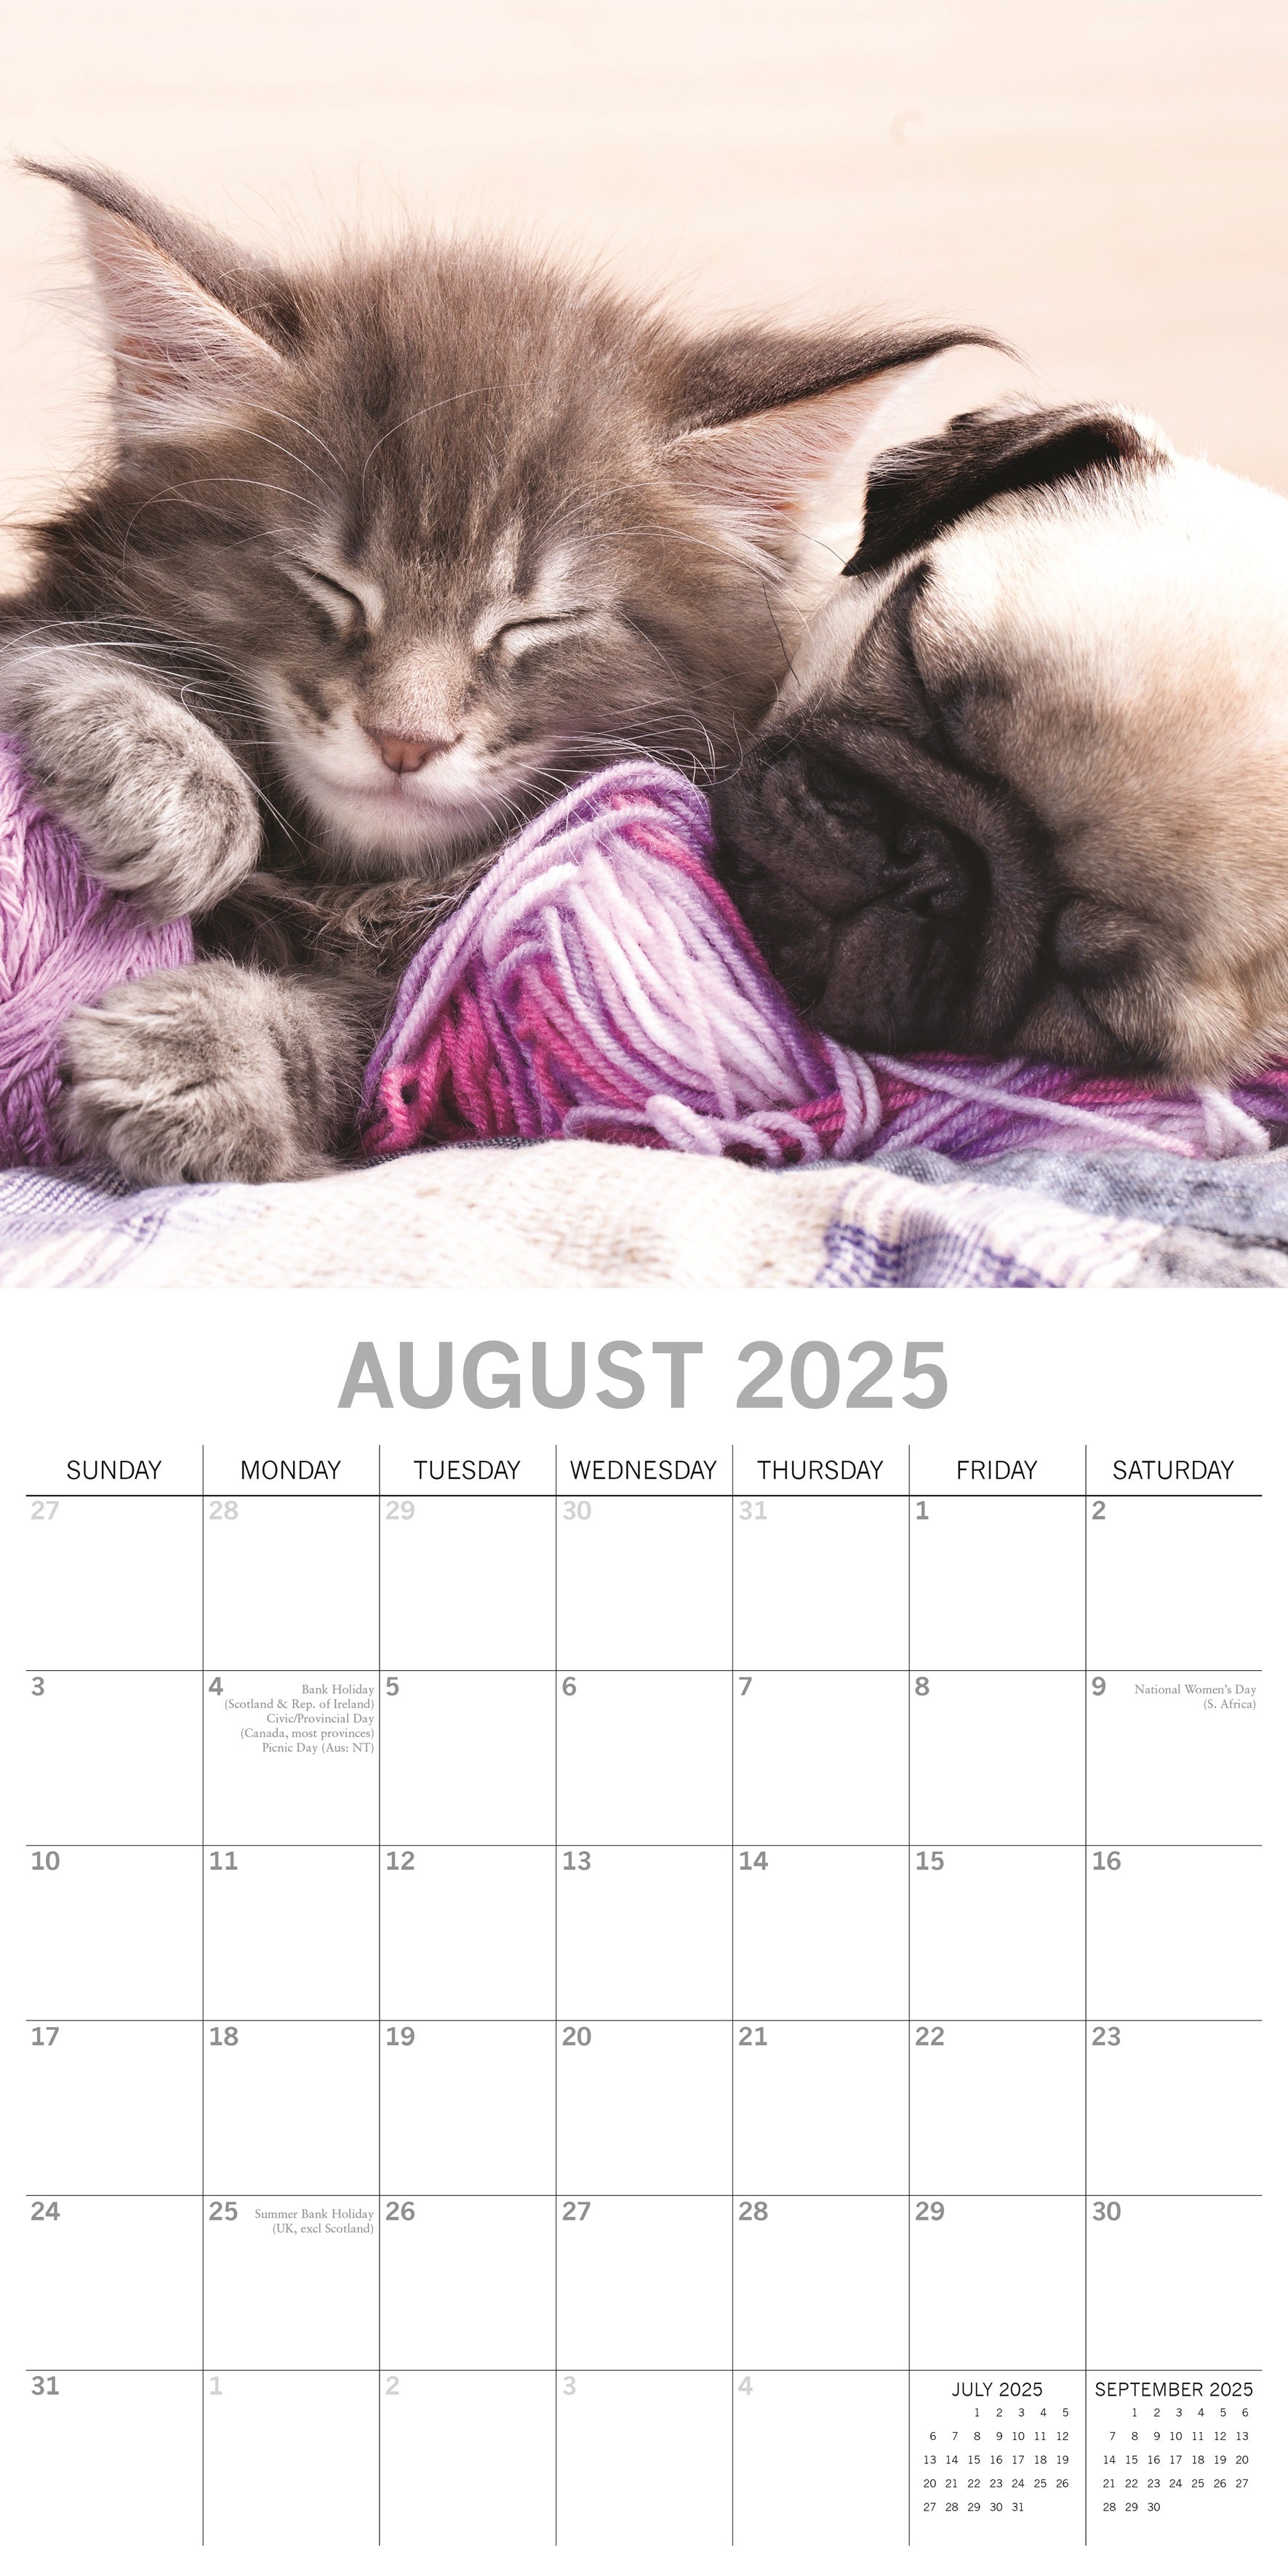 2025 Cats & Dogs - Square Wall Calendar